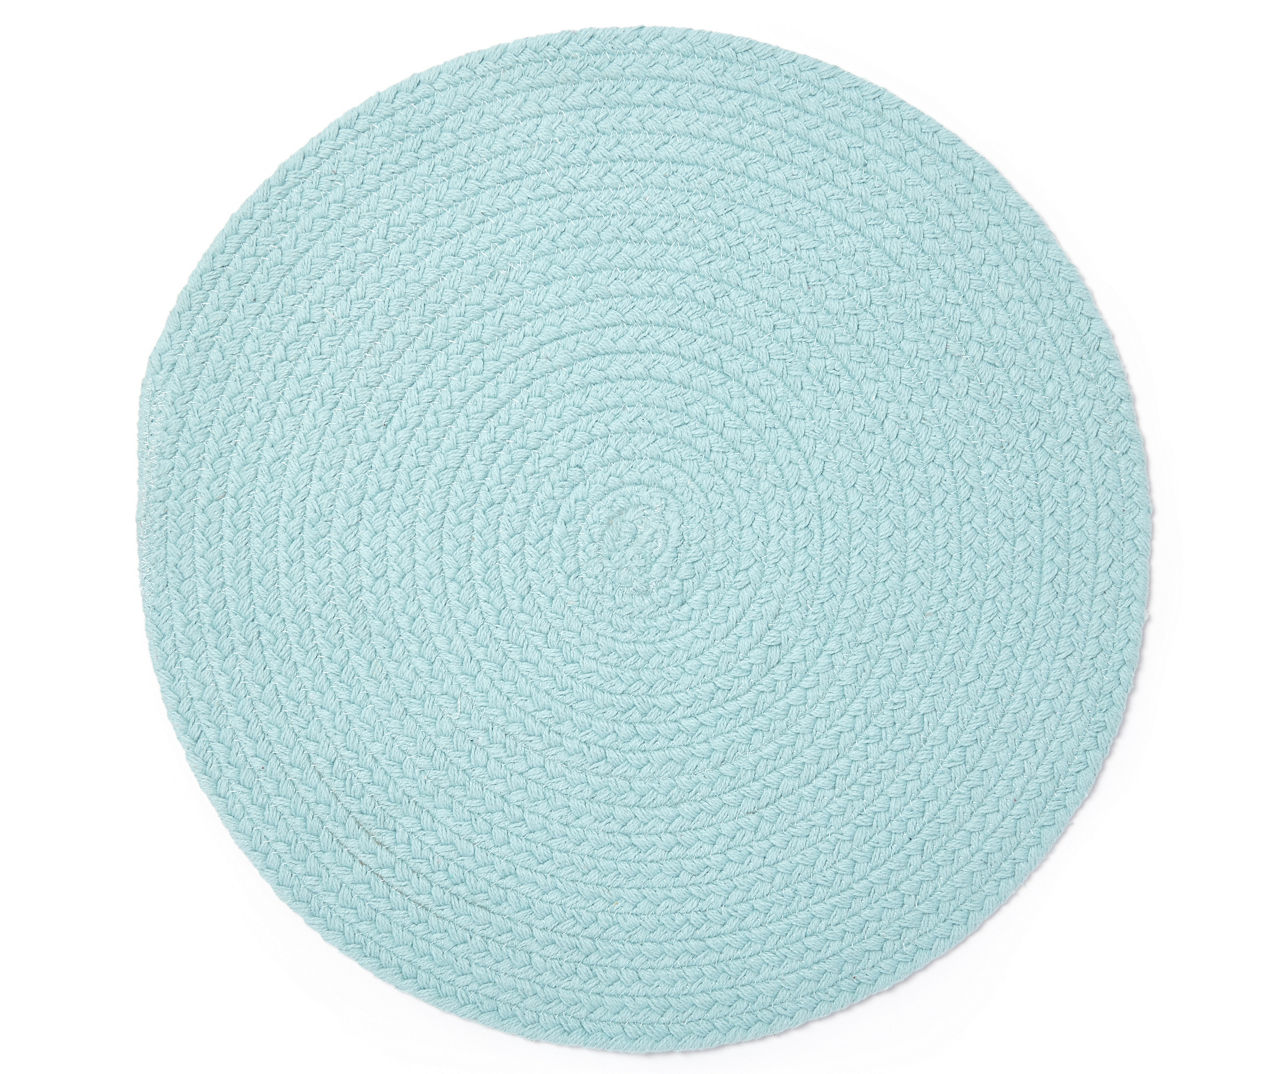 Mineral Blue Braided Round Placemat